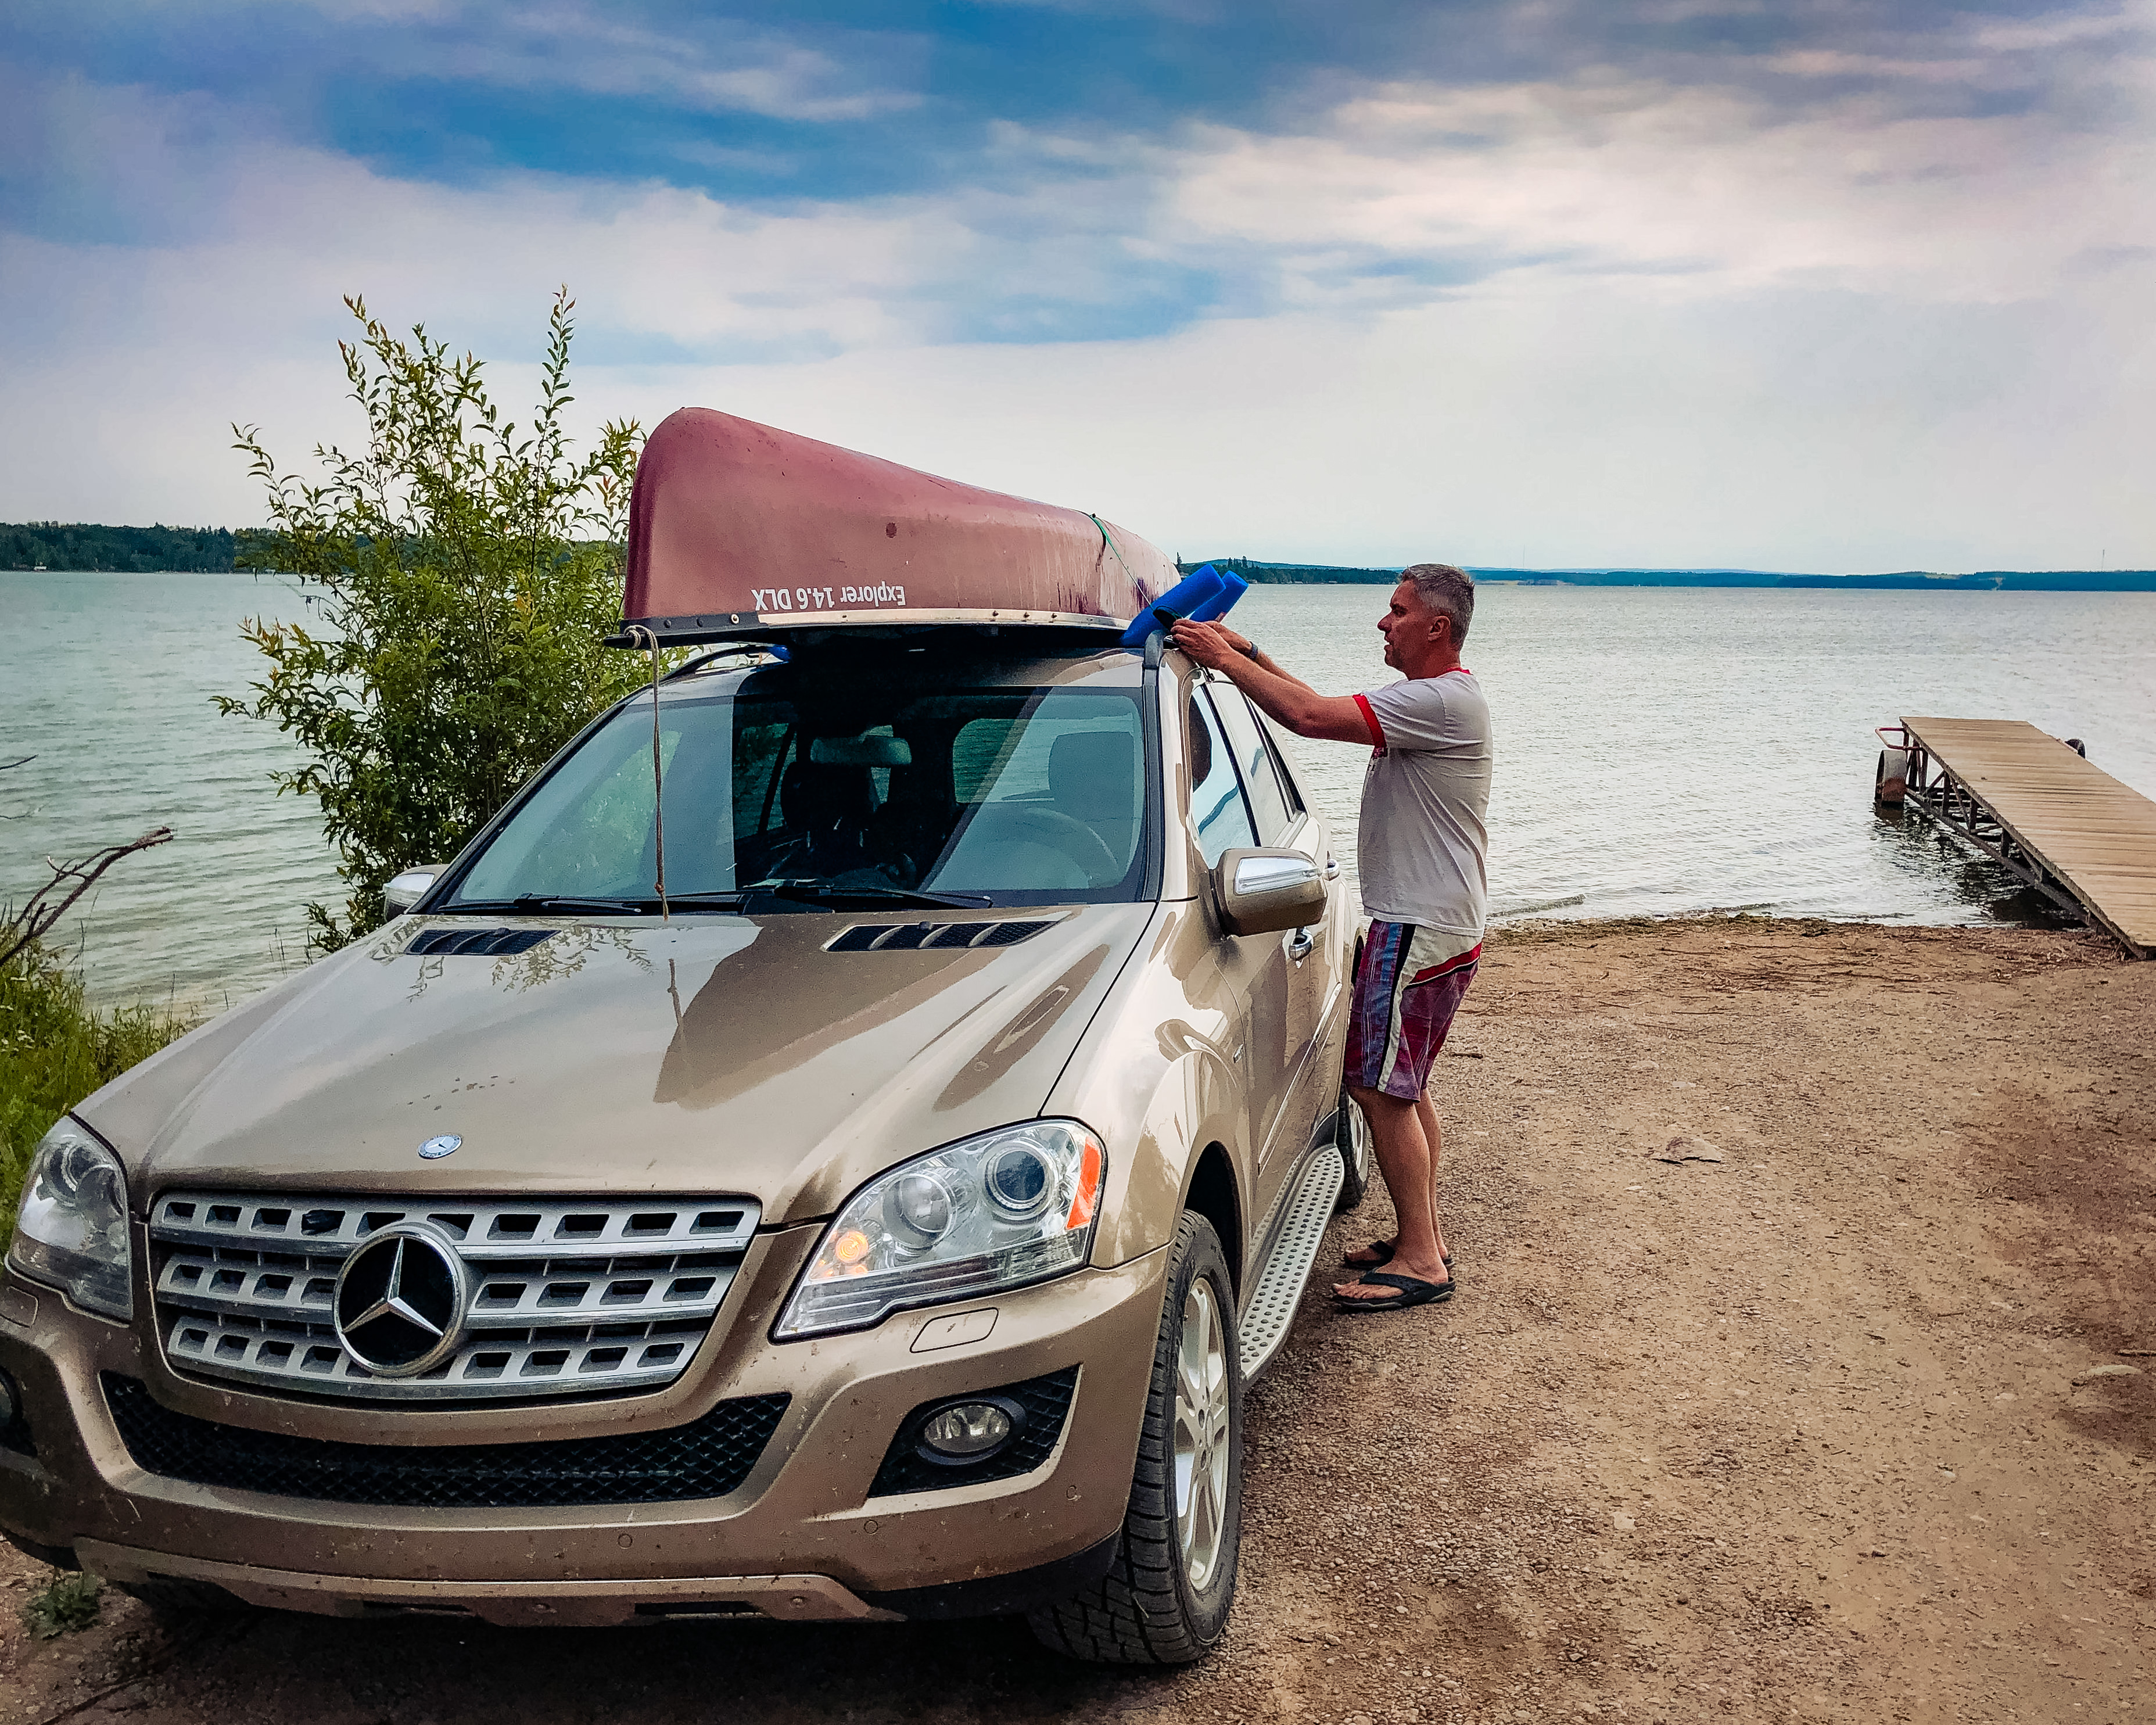 Moose Lake Boat Launch · Photo by The 38 Photography